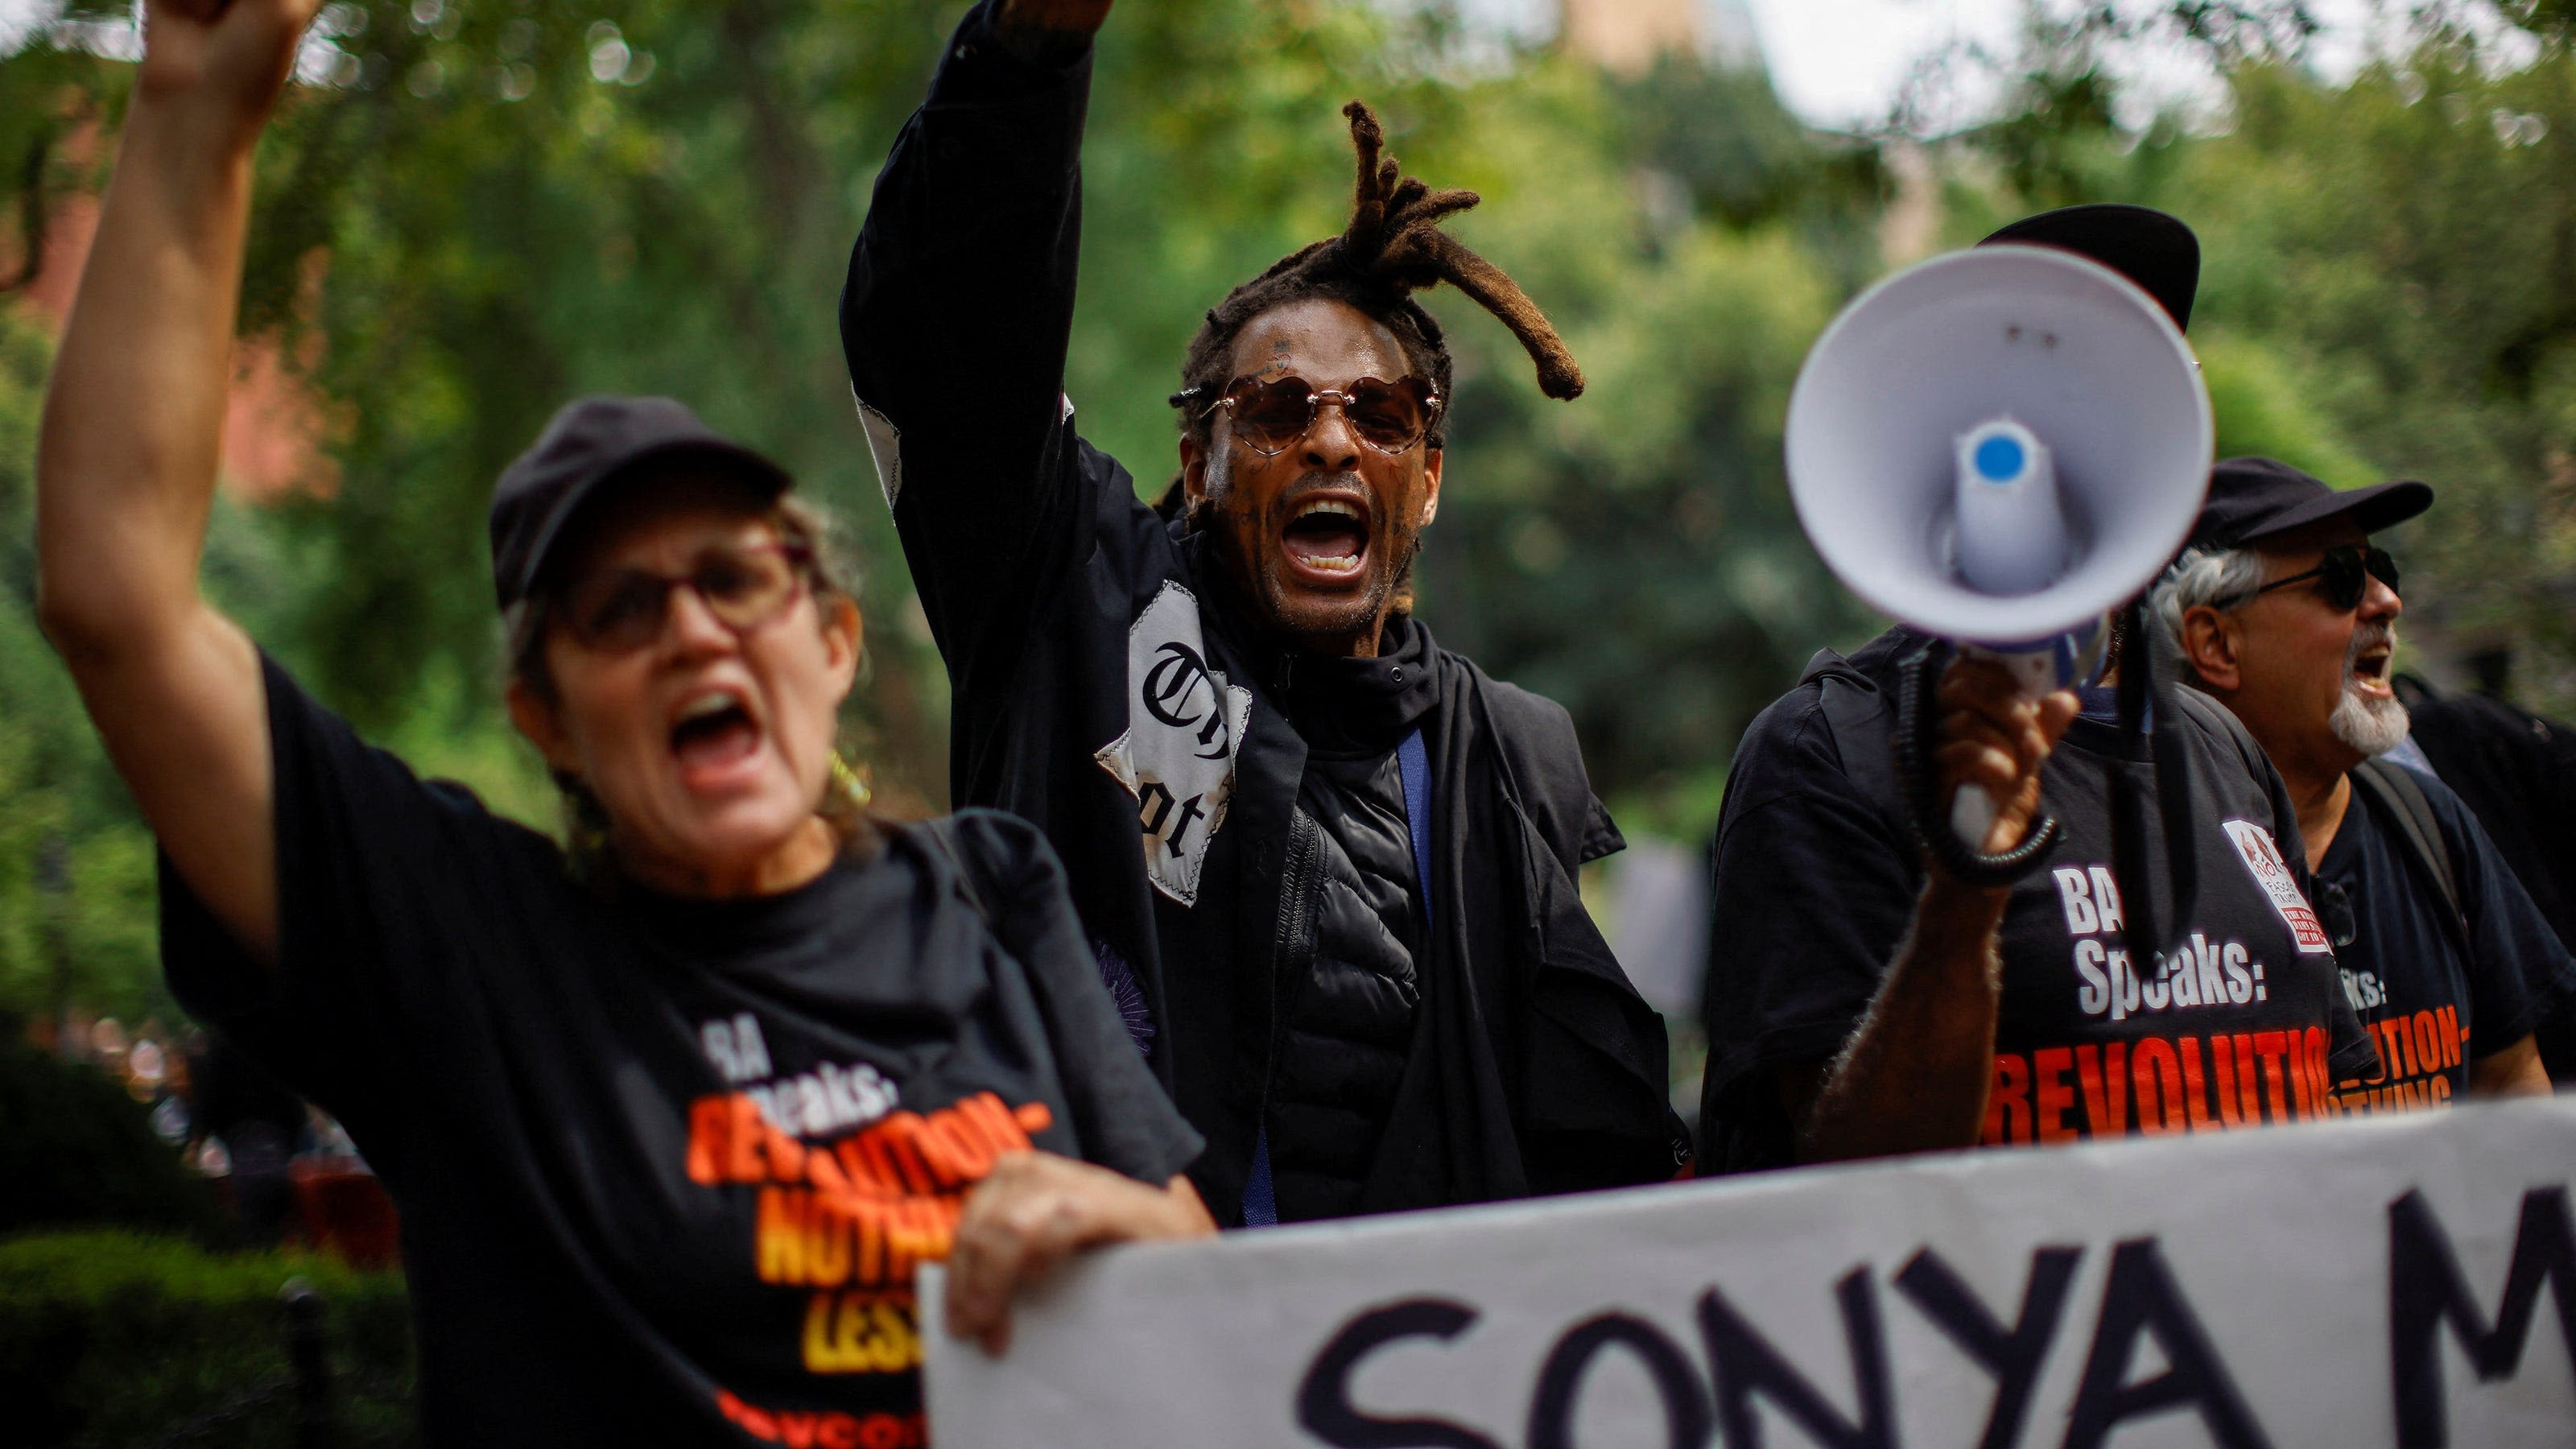 Vigils honor Sonya Massey as calls for justice grow | The Excerpt